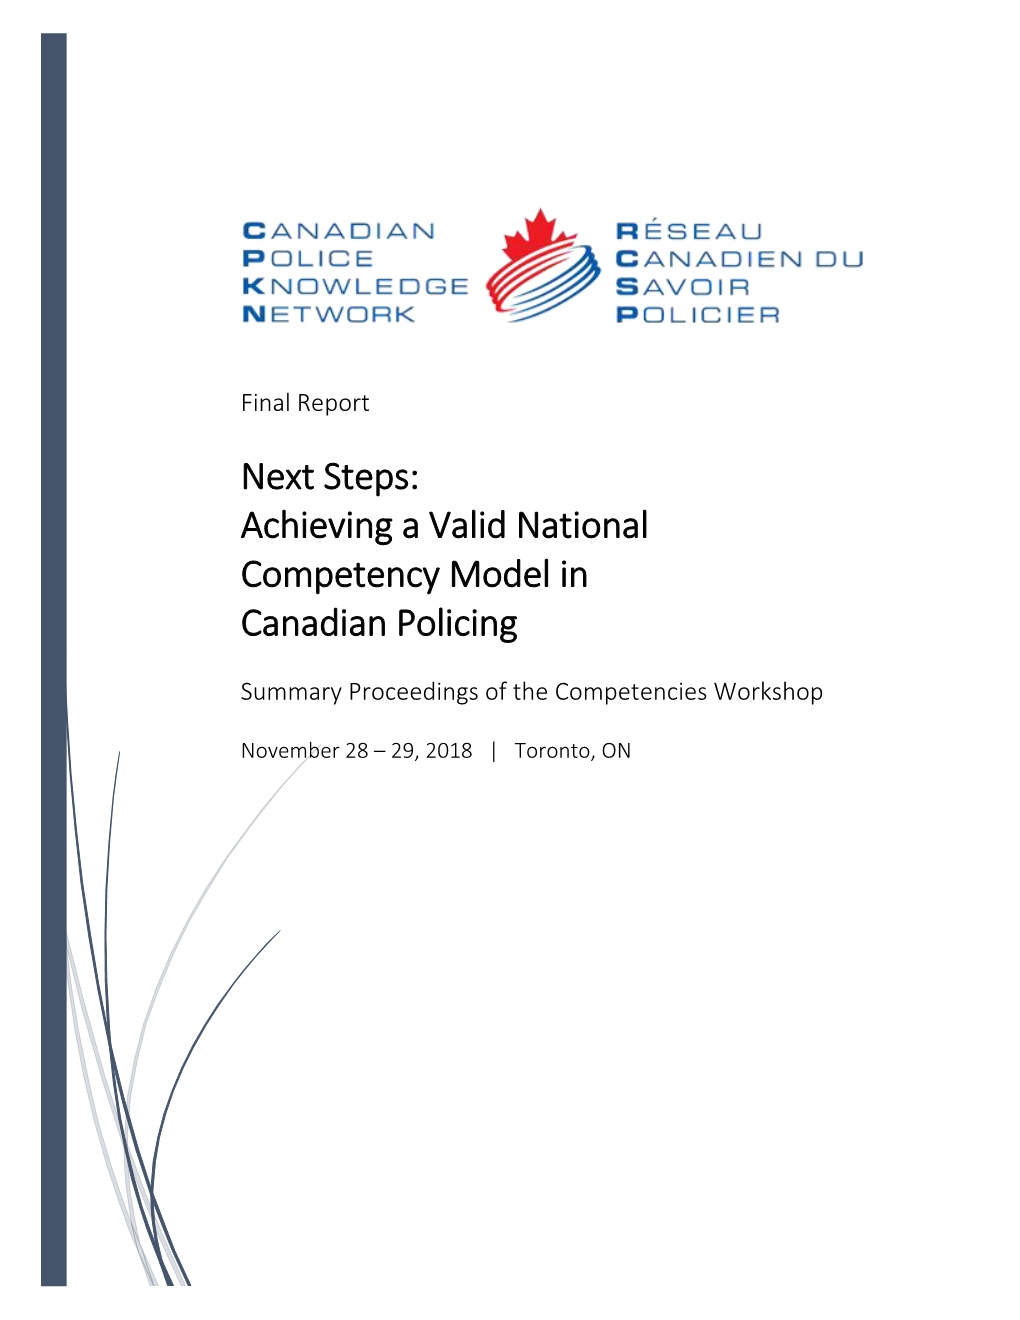 Next Steps: Achieving a Valid National Competency Model in Canadian Policing